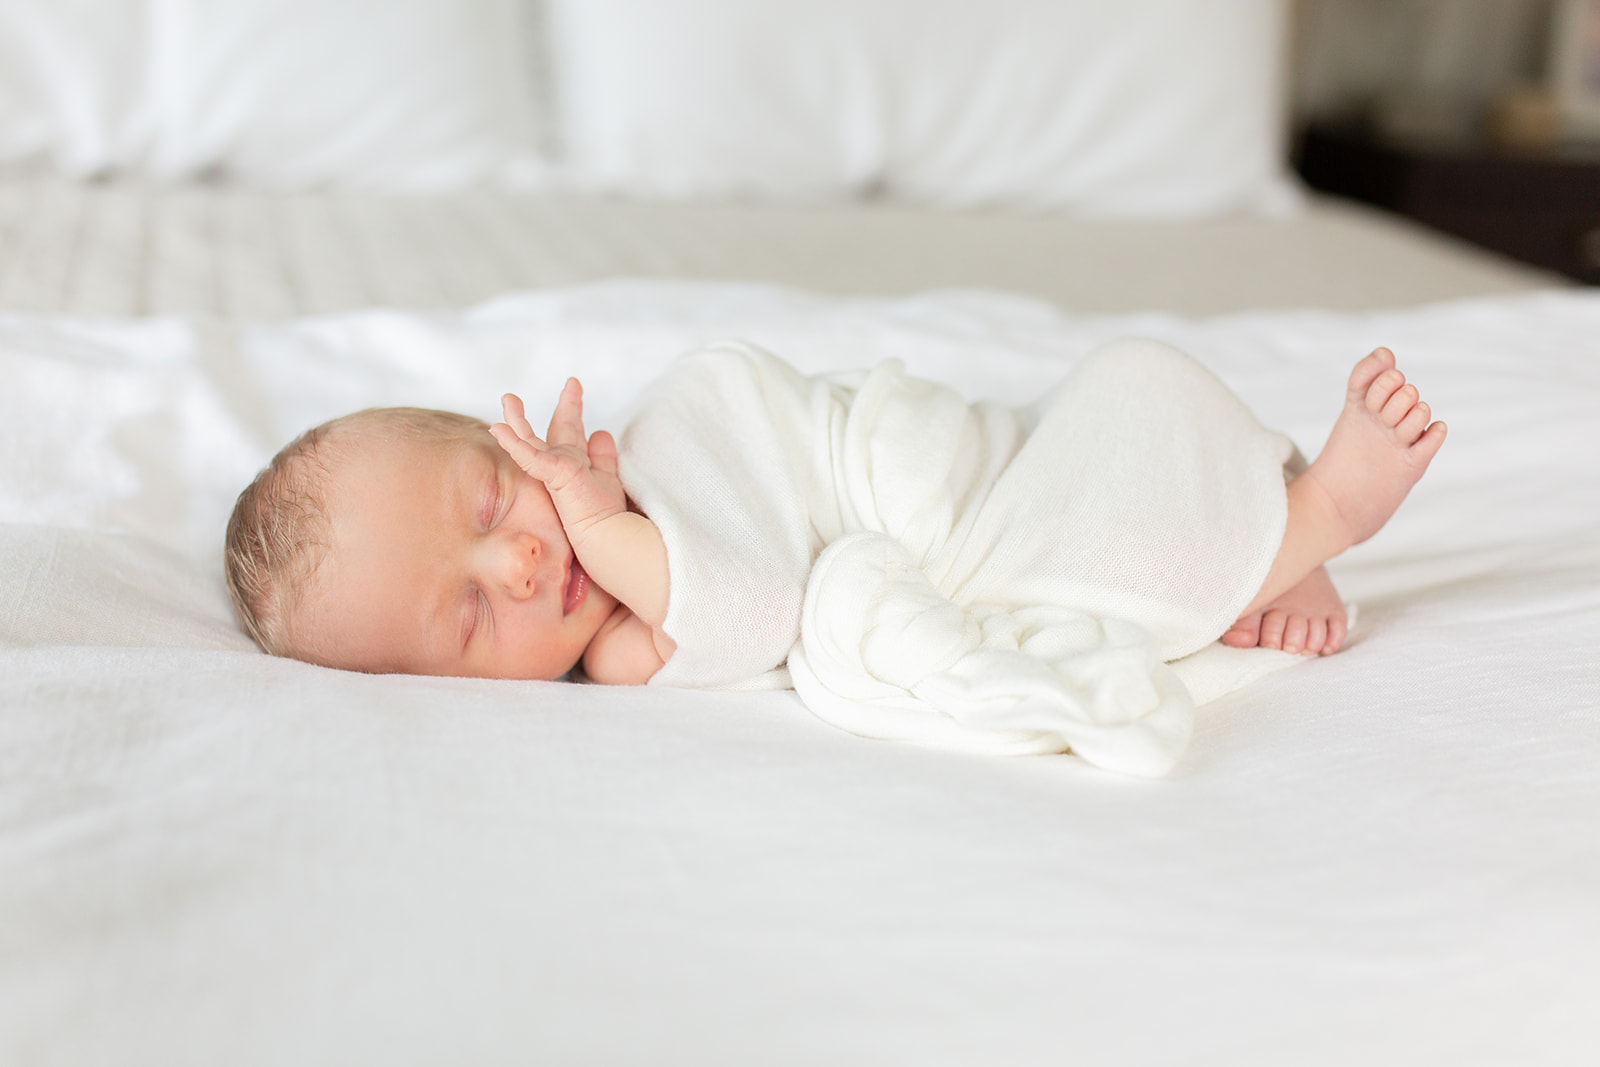 A newborn baby sleeps on a white bed wrapped in a white blanket with a hand on it's cheek